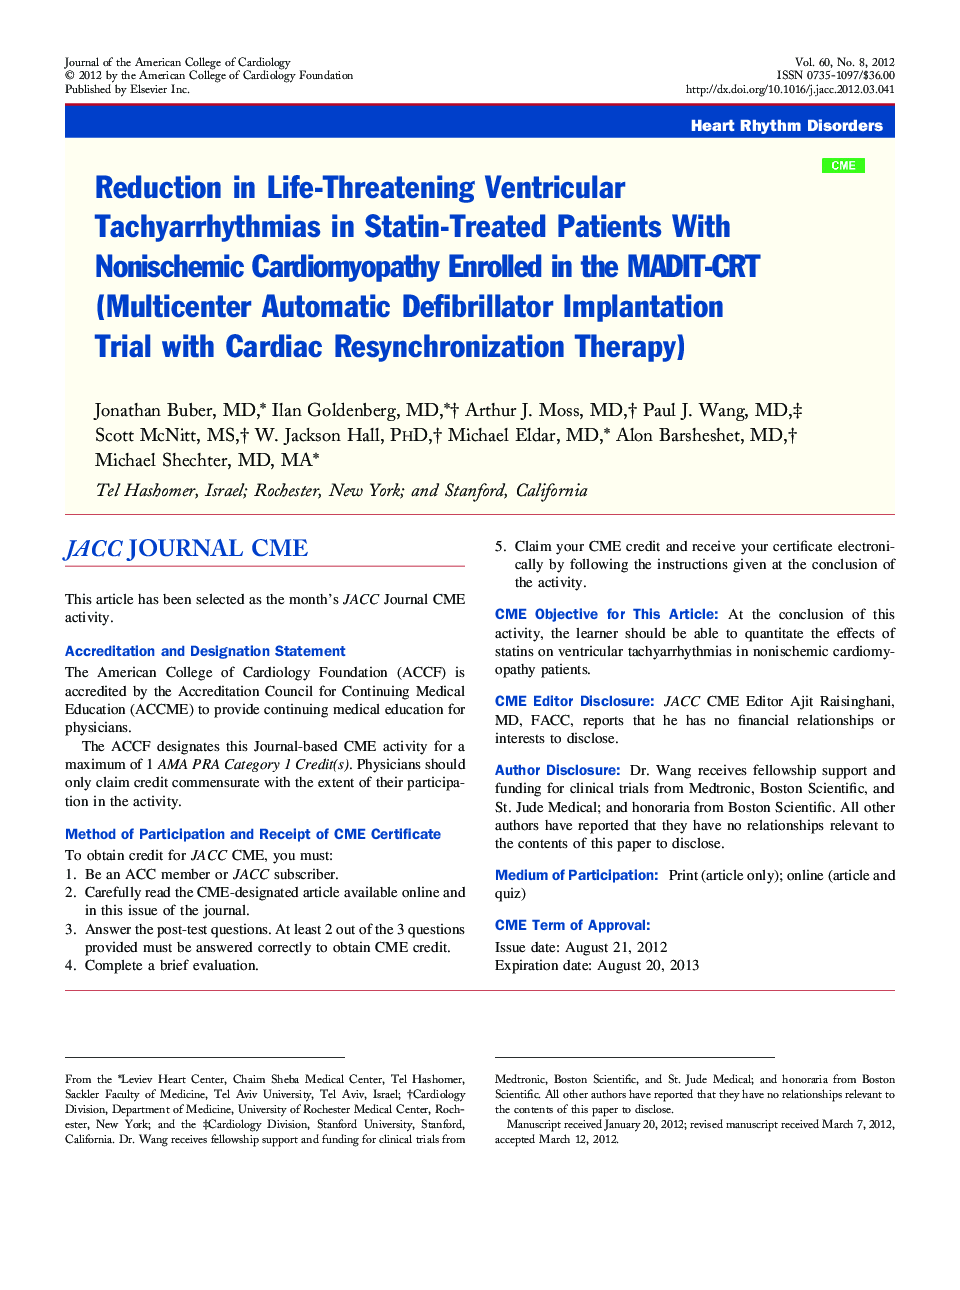 Reduction in Life-Threatening Ventricular Tachyarrhythmias in Statin-Treated Patients With Nonischemic Cardiomyopathy Enrolled in the MADIT-CRT (Multicenter Automatic Defibrillator Implantation Trial with Cardiac Resynchronization Therapy) 